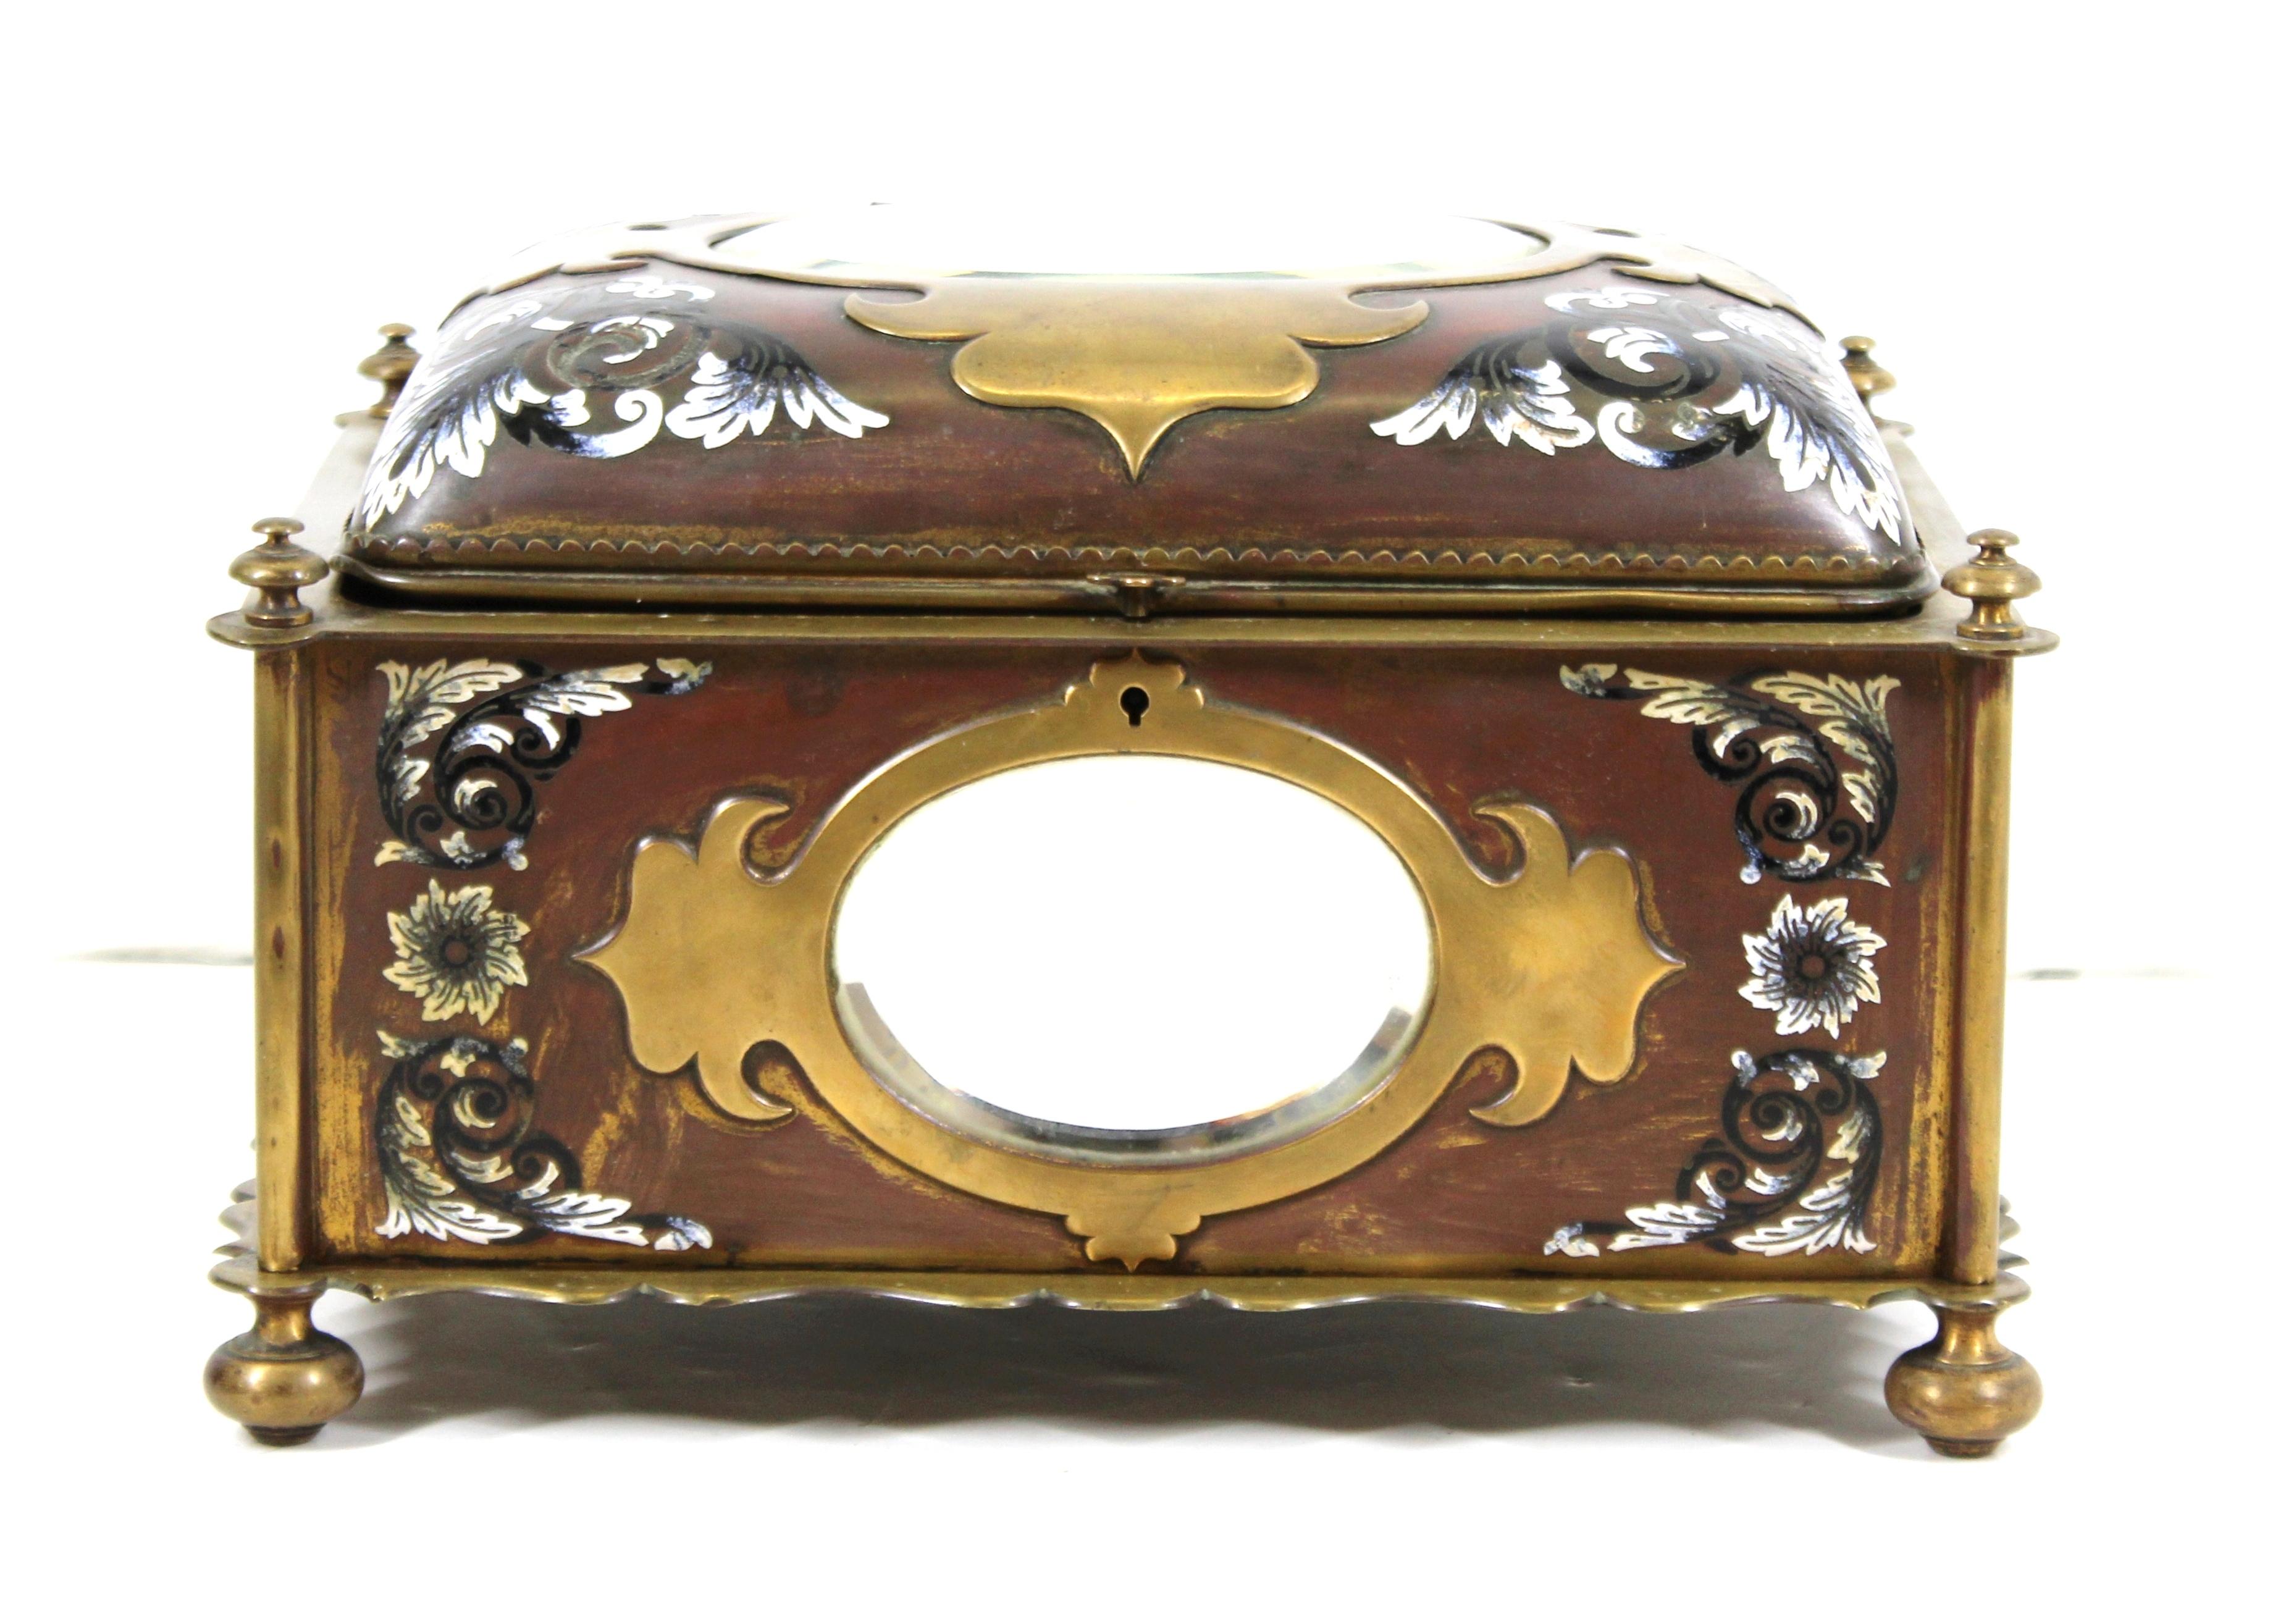 Bronze French Renaissance Revival Champleve Enamel Jewelry Box with Oval Mirror Inserts For Sale